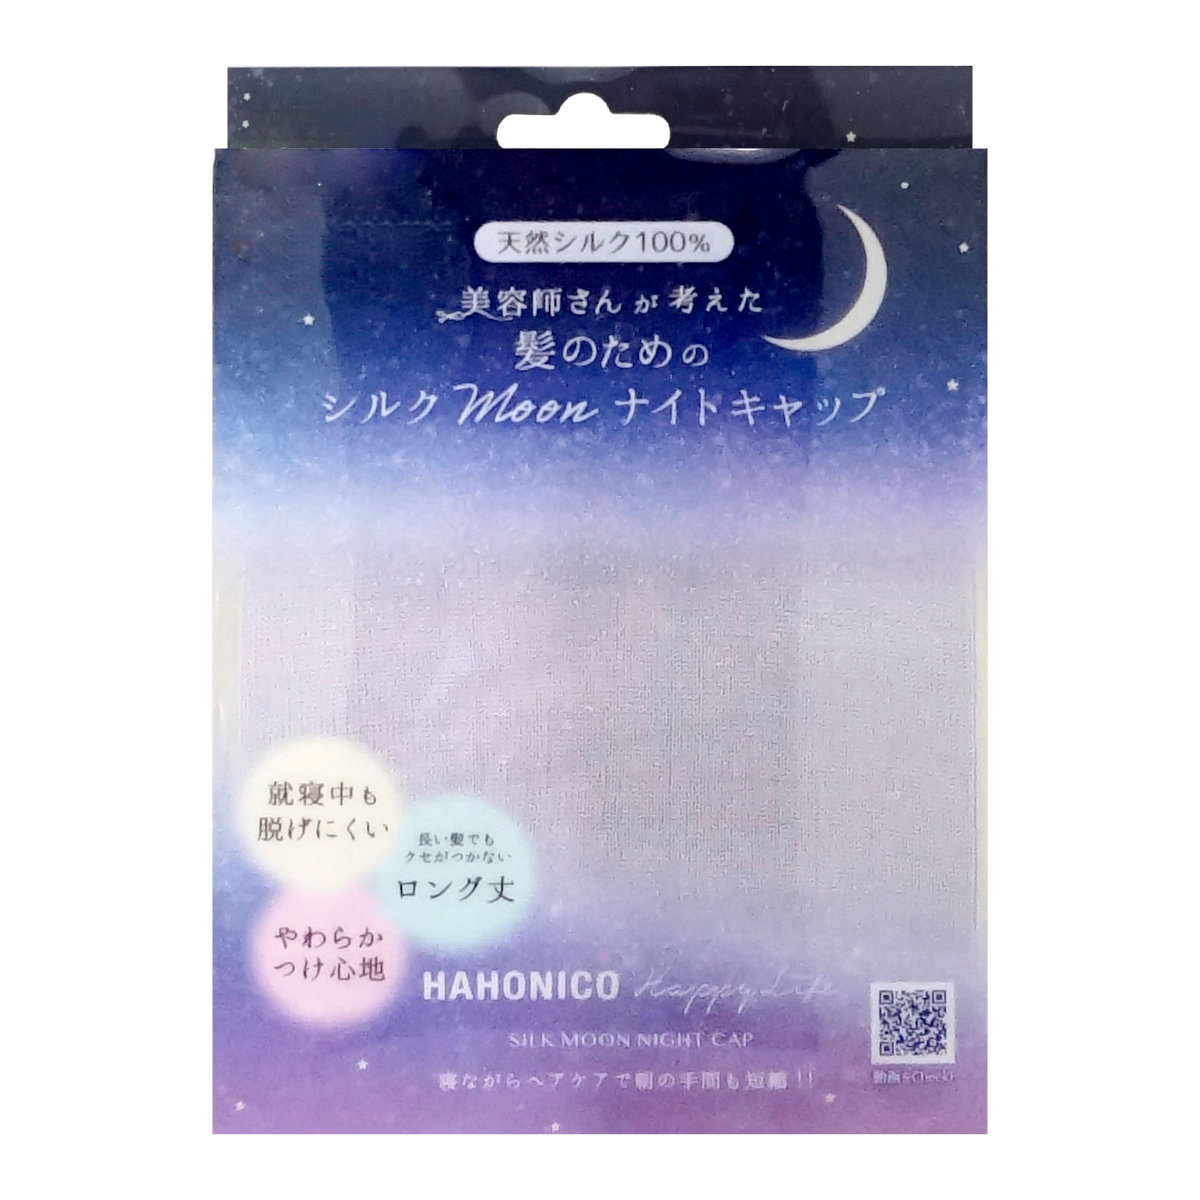 [ coupon ] beauty . san . thought .. therefore. silk moon Night cap purple [ is ho Nico Hahonico][ mail service free shipping ]